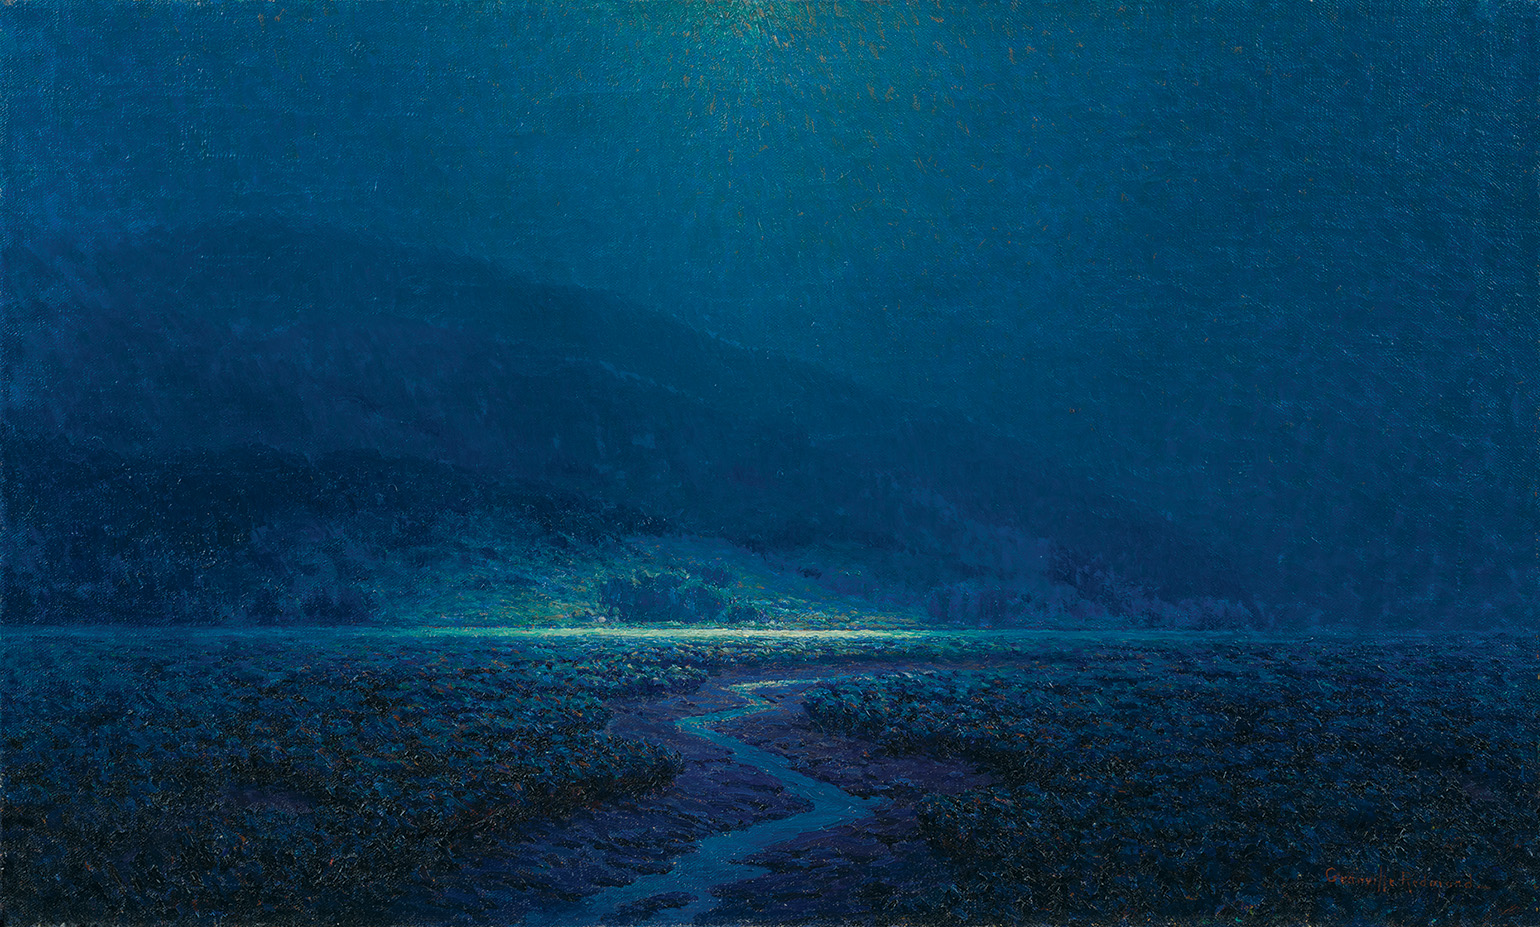 Granville Redmond, Untitled - Moonlight Marsh Scene, early 20th century, Oil on canvas, 26 x 43 in. UC Irvine Institute and Museum of California Art, Gift of The Irvine Museum